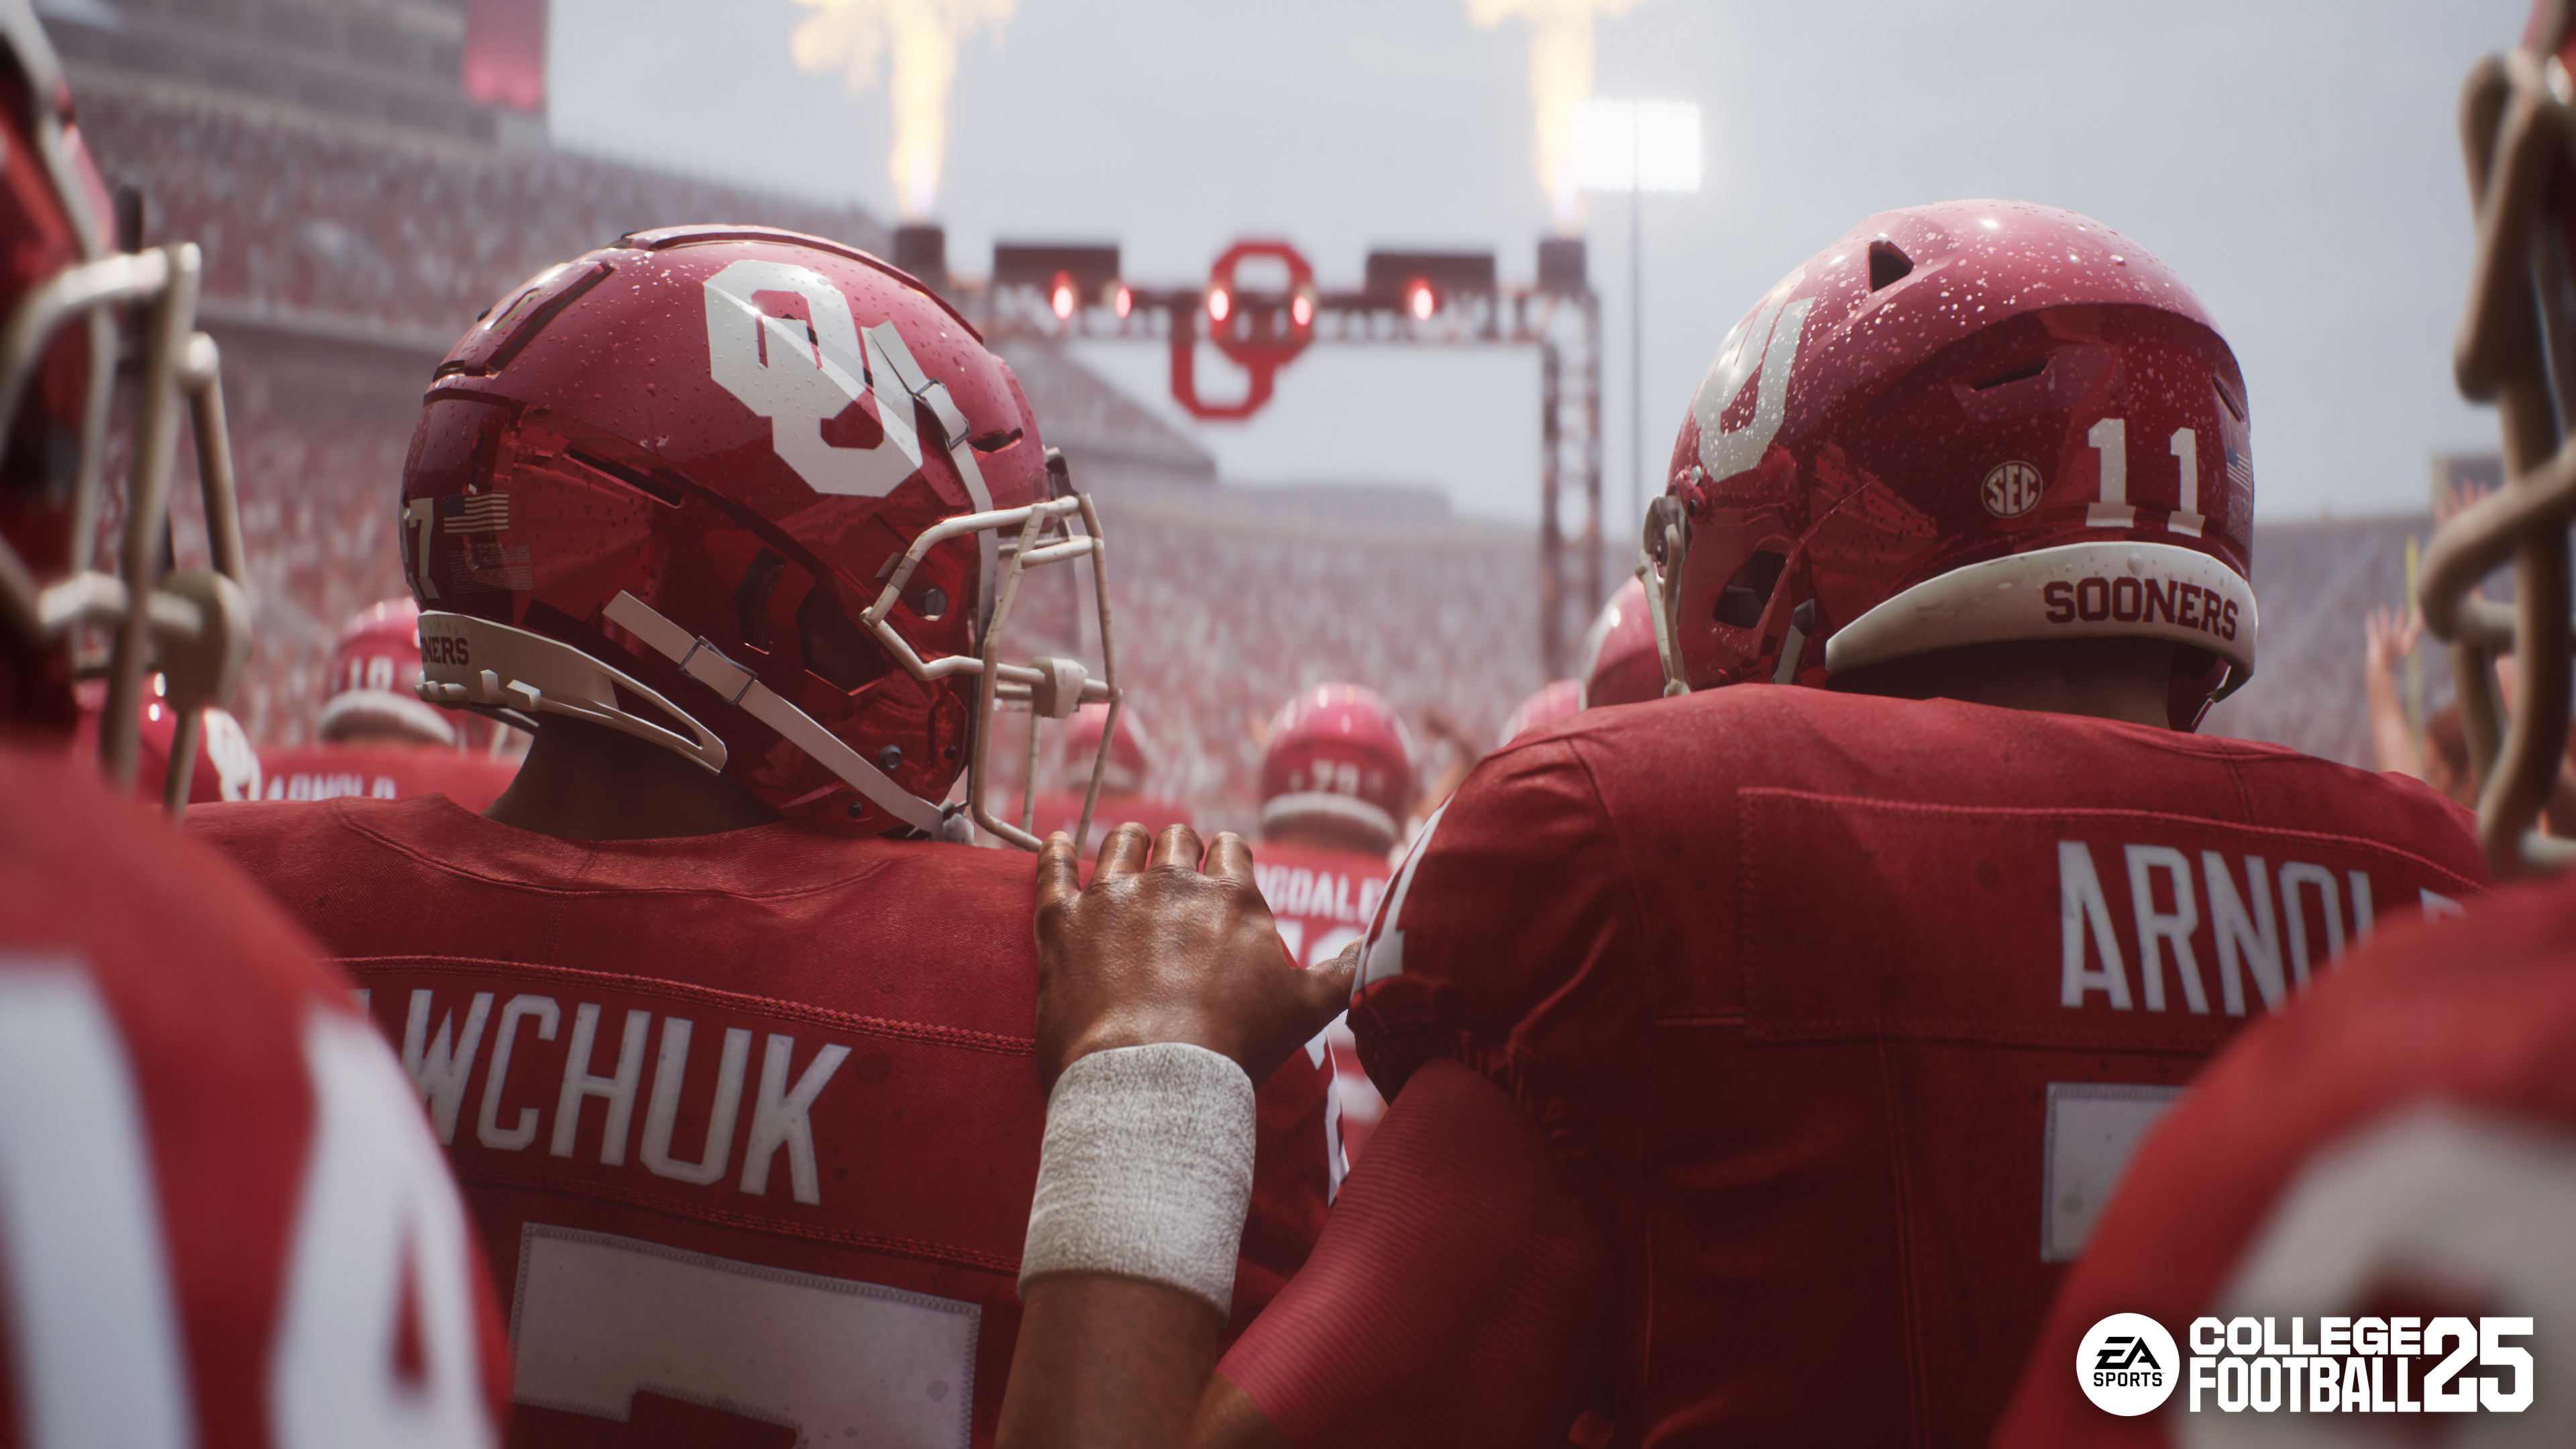 Gavin Sawchuk and Jackson Arnold of the Oklahoma Sooners walk out onto the field at the Palace on the Prairie in a screenshot from EA Sports College Football 25